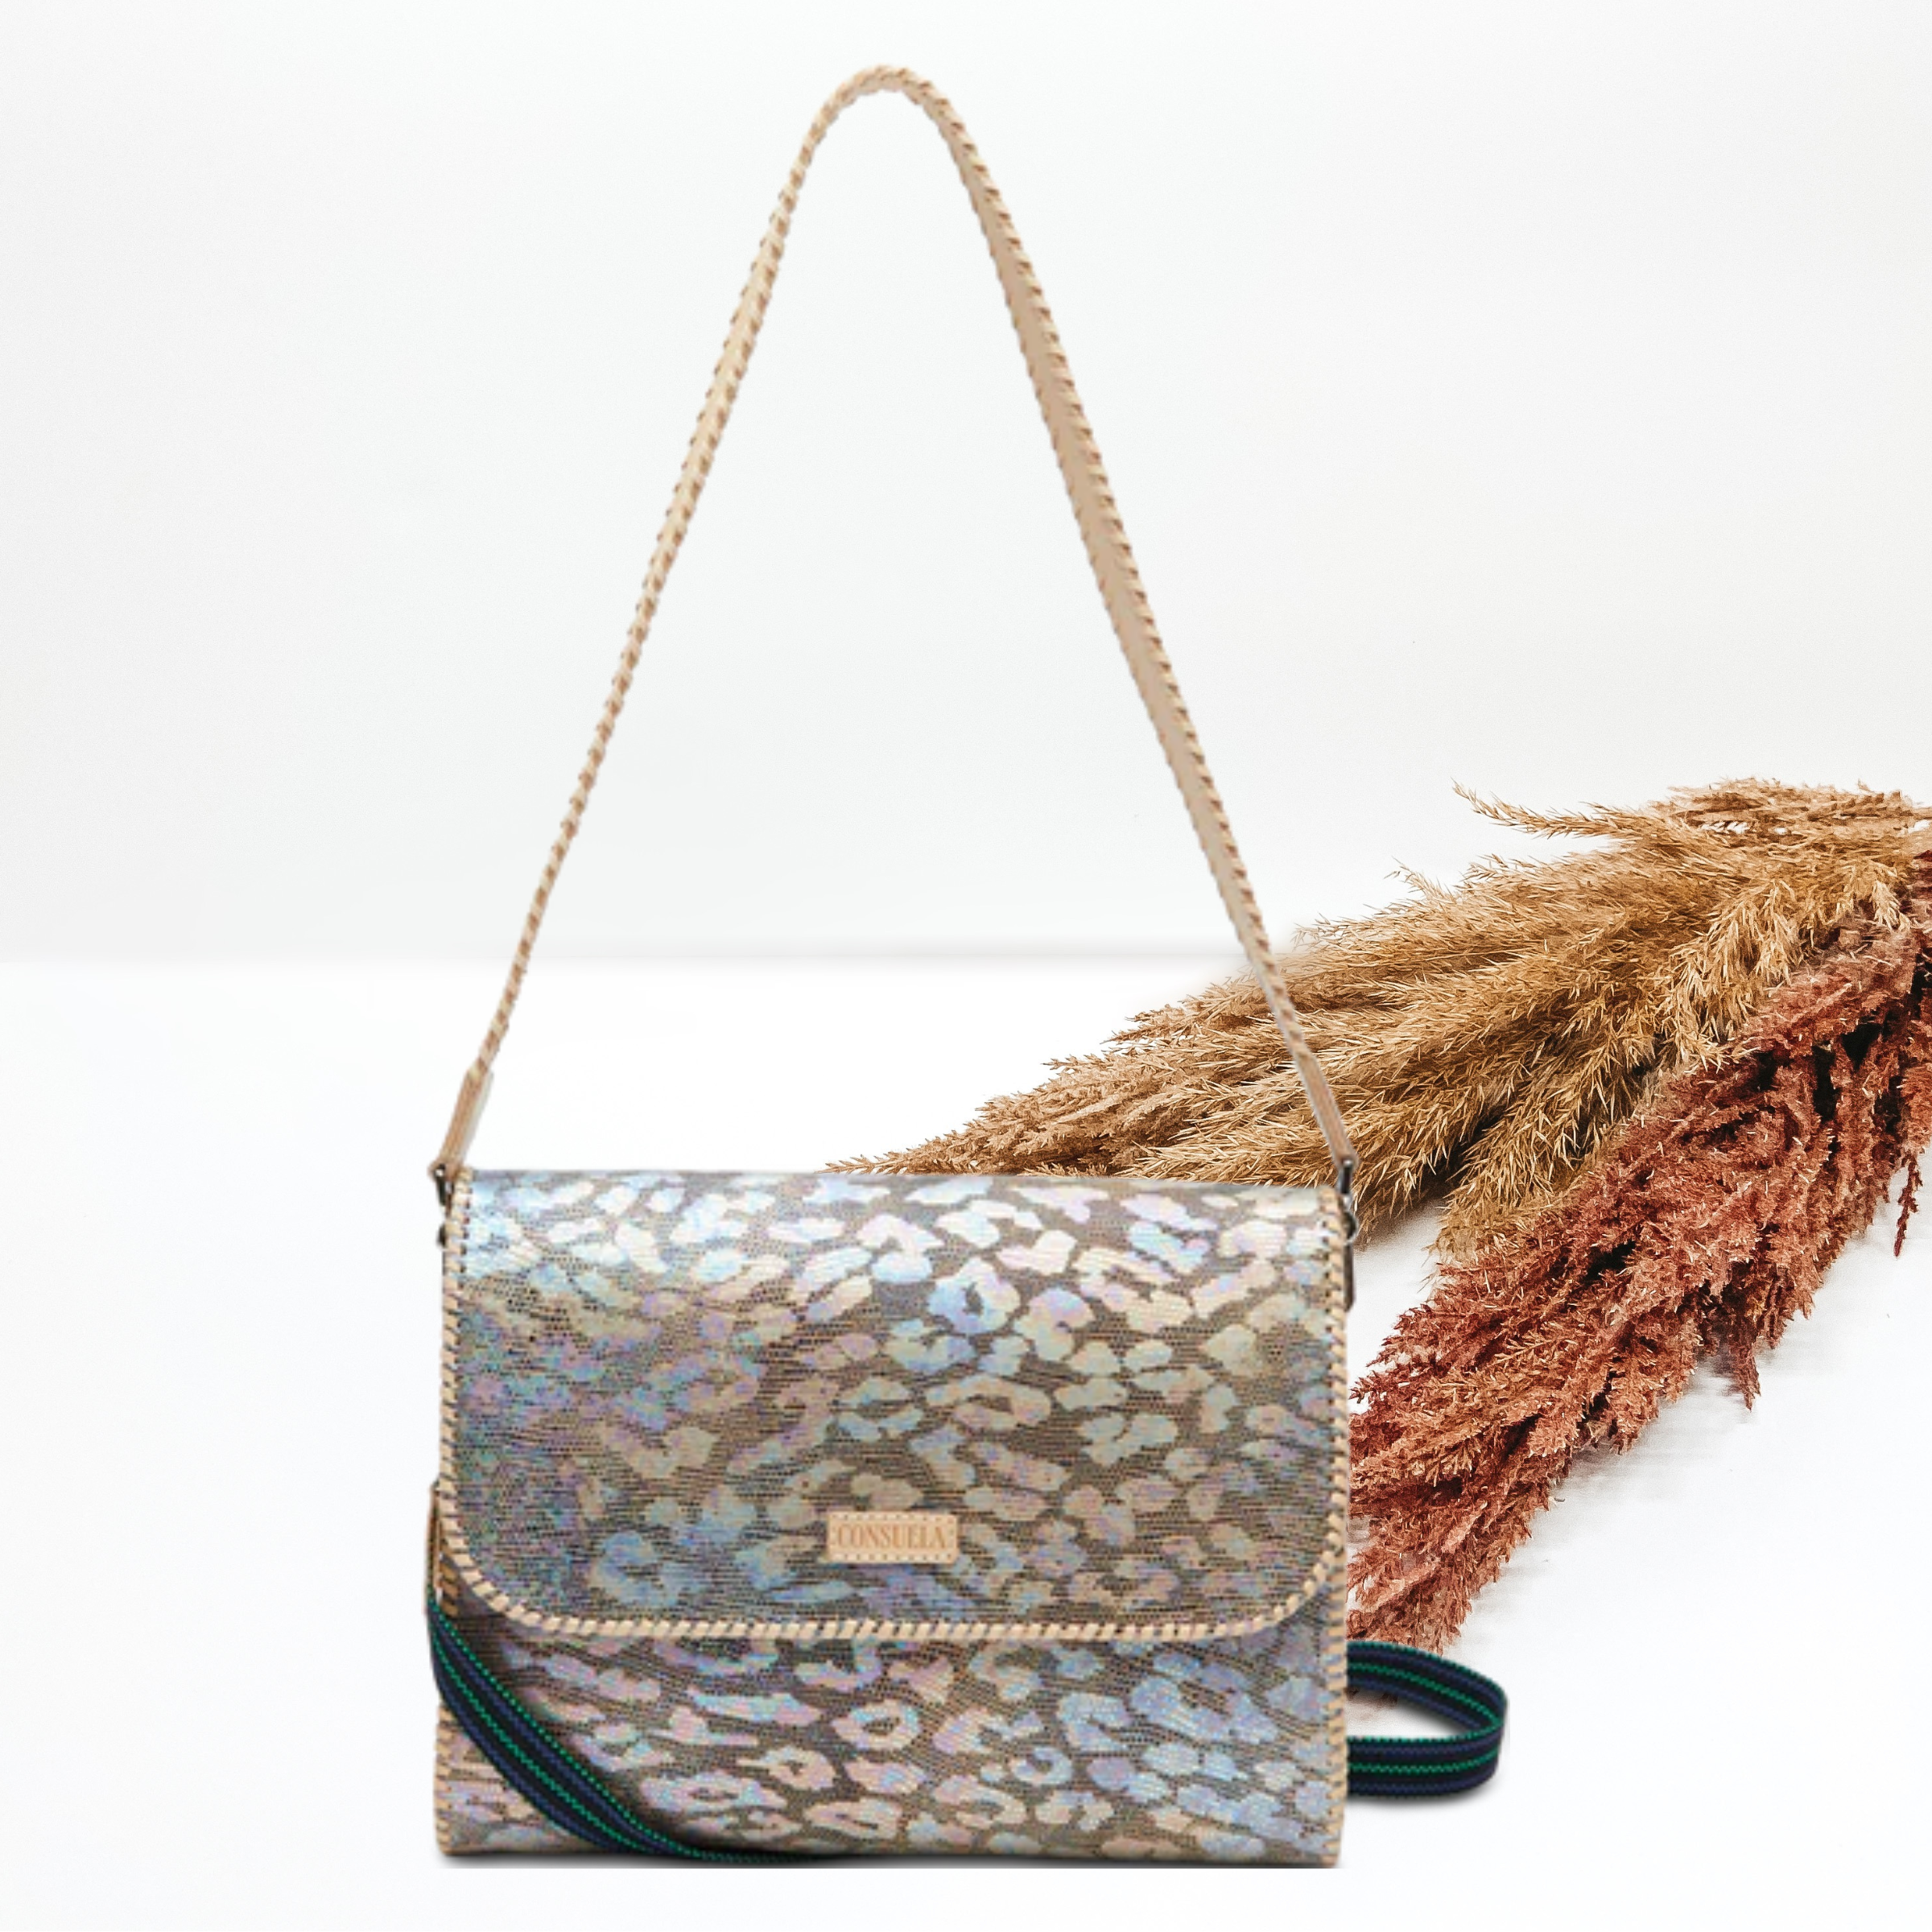 Pictured is a rectangle purse with a light tan strap and a stitched, striped strap. This bag has an iridescent, multicolor leopard print design with a light tan outline stitching. This bag is pictured on a white background with pompous grass behind it. 